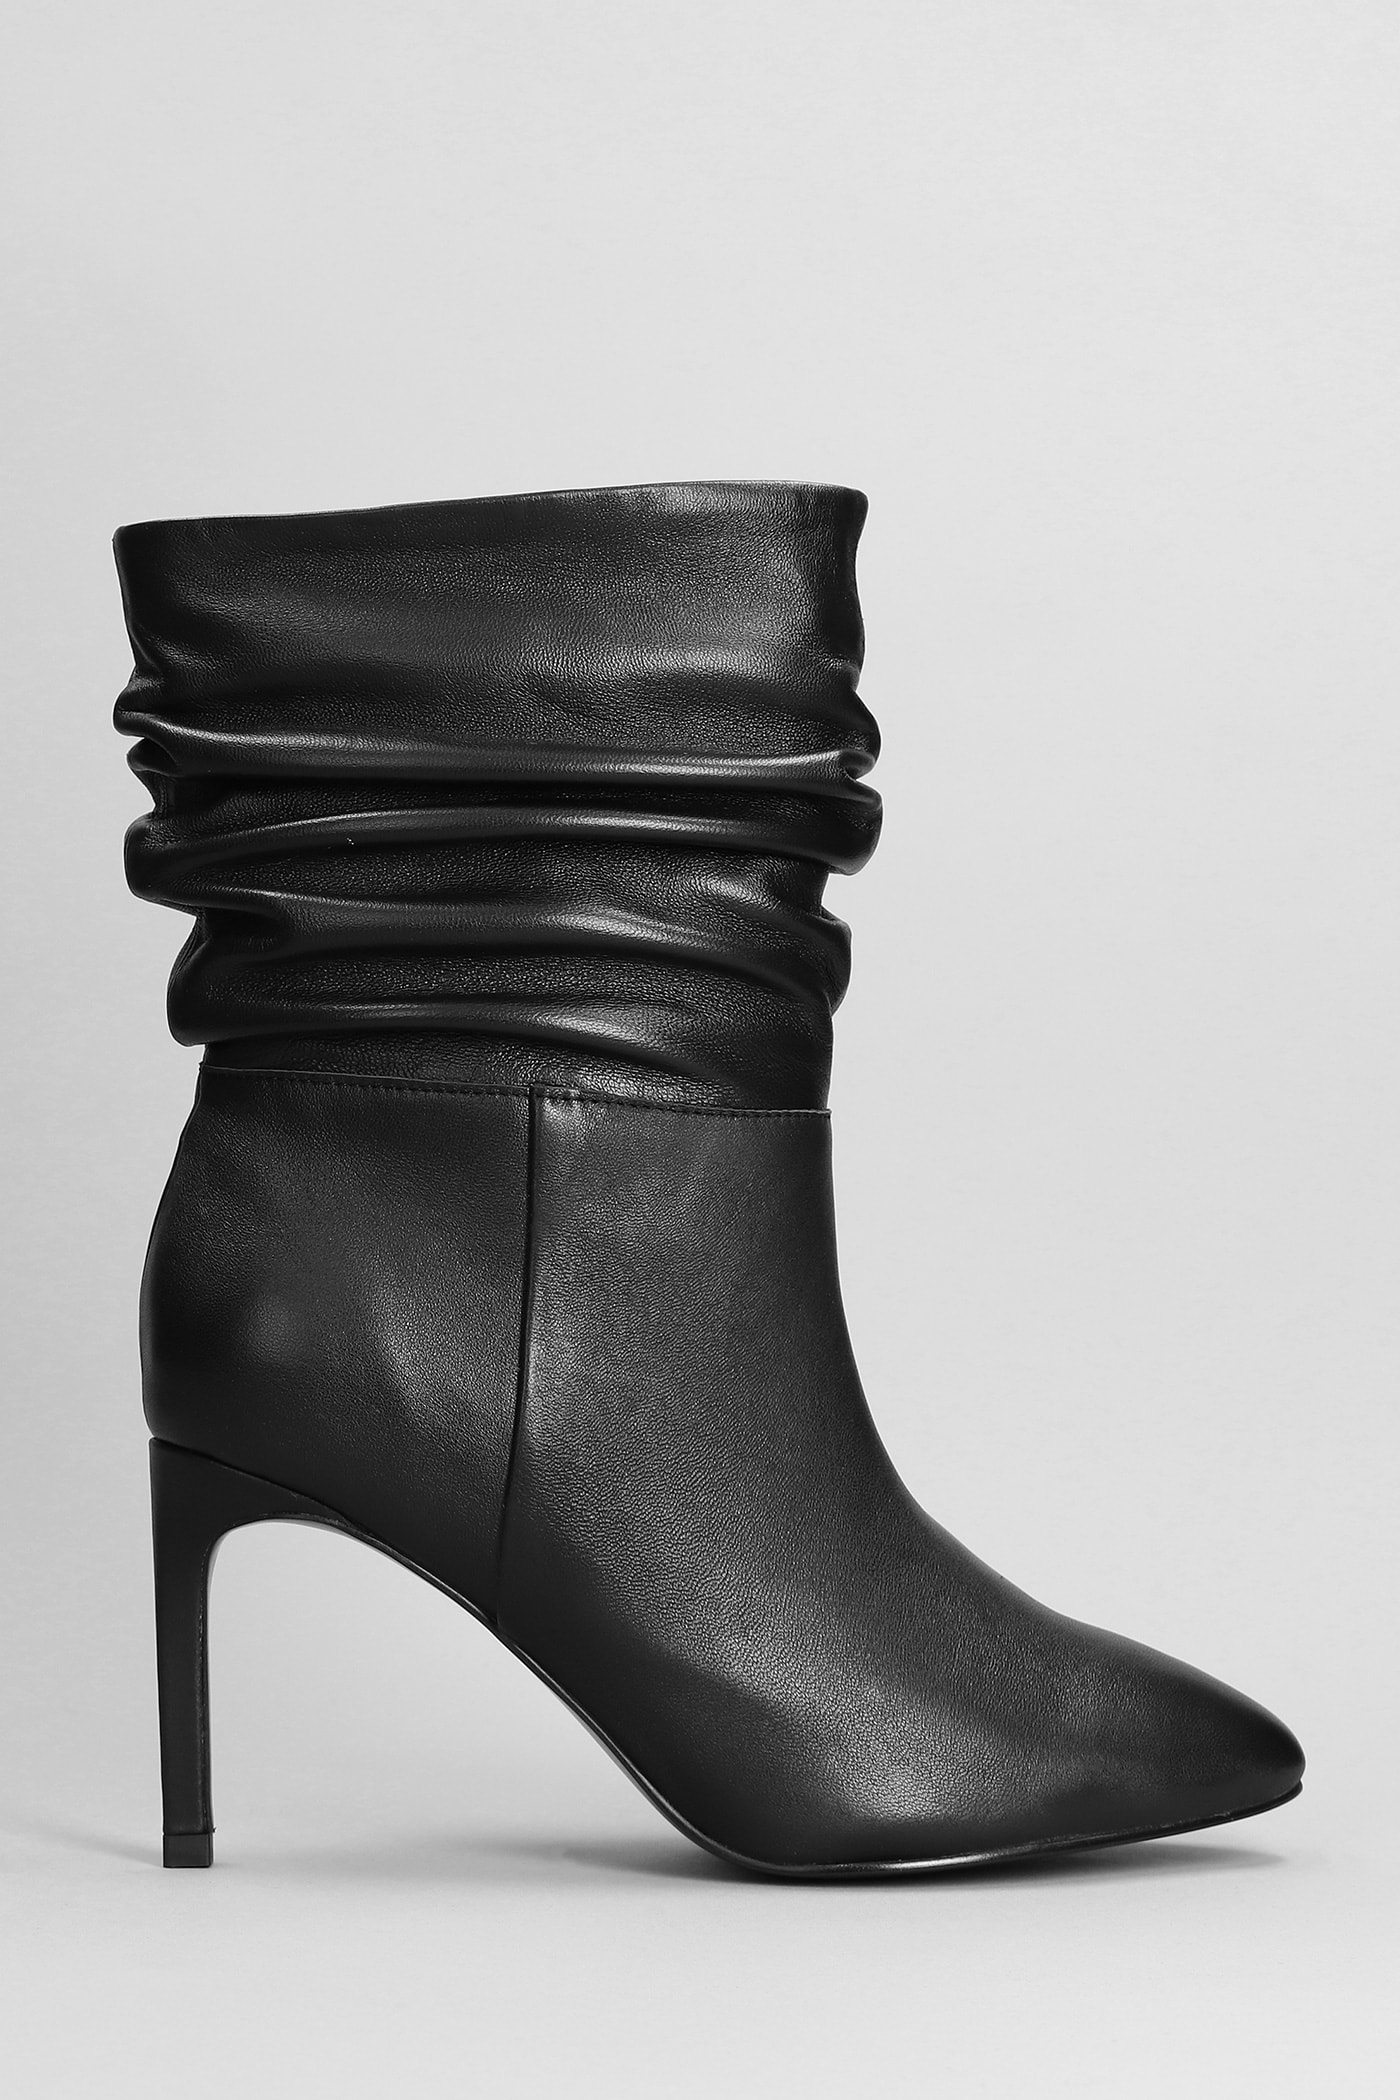 BIBI LOU HIGH HEELS ANKLE BOOTS IN BLACK LEATHER